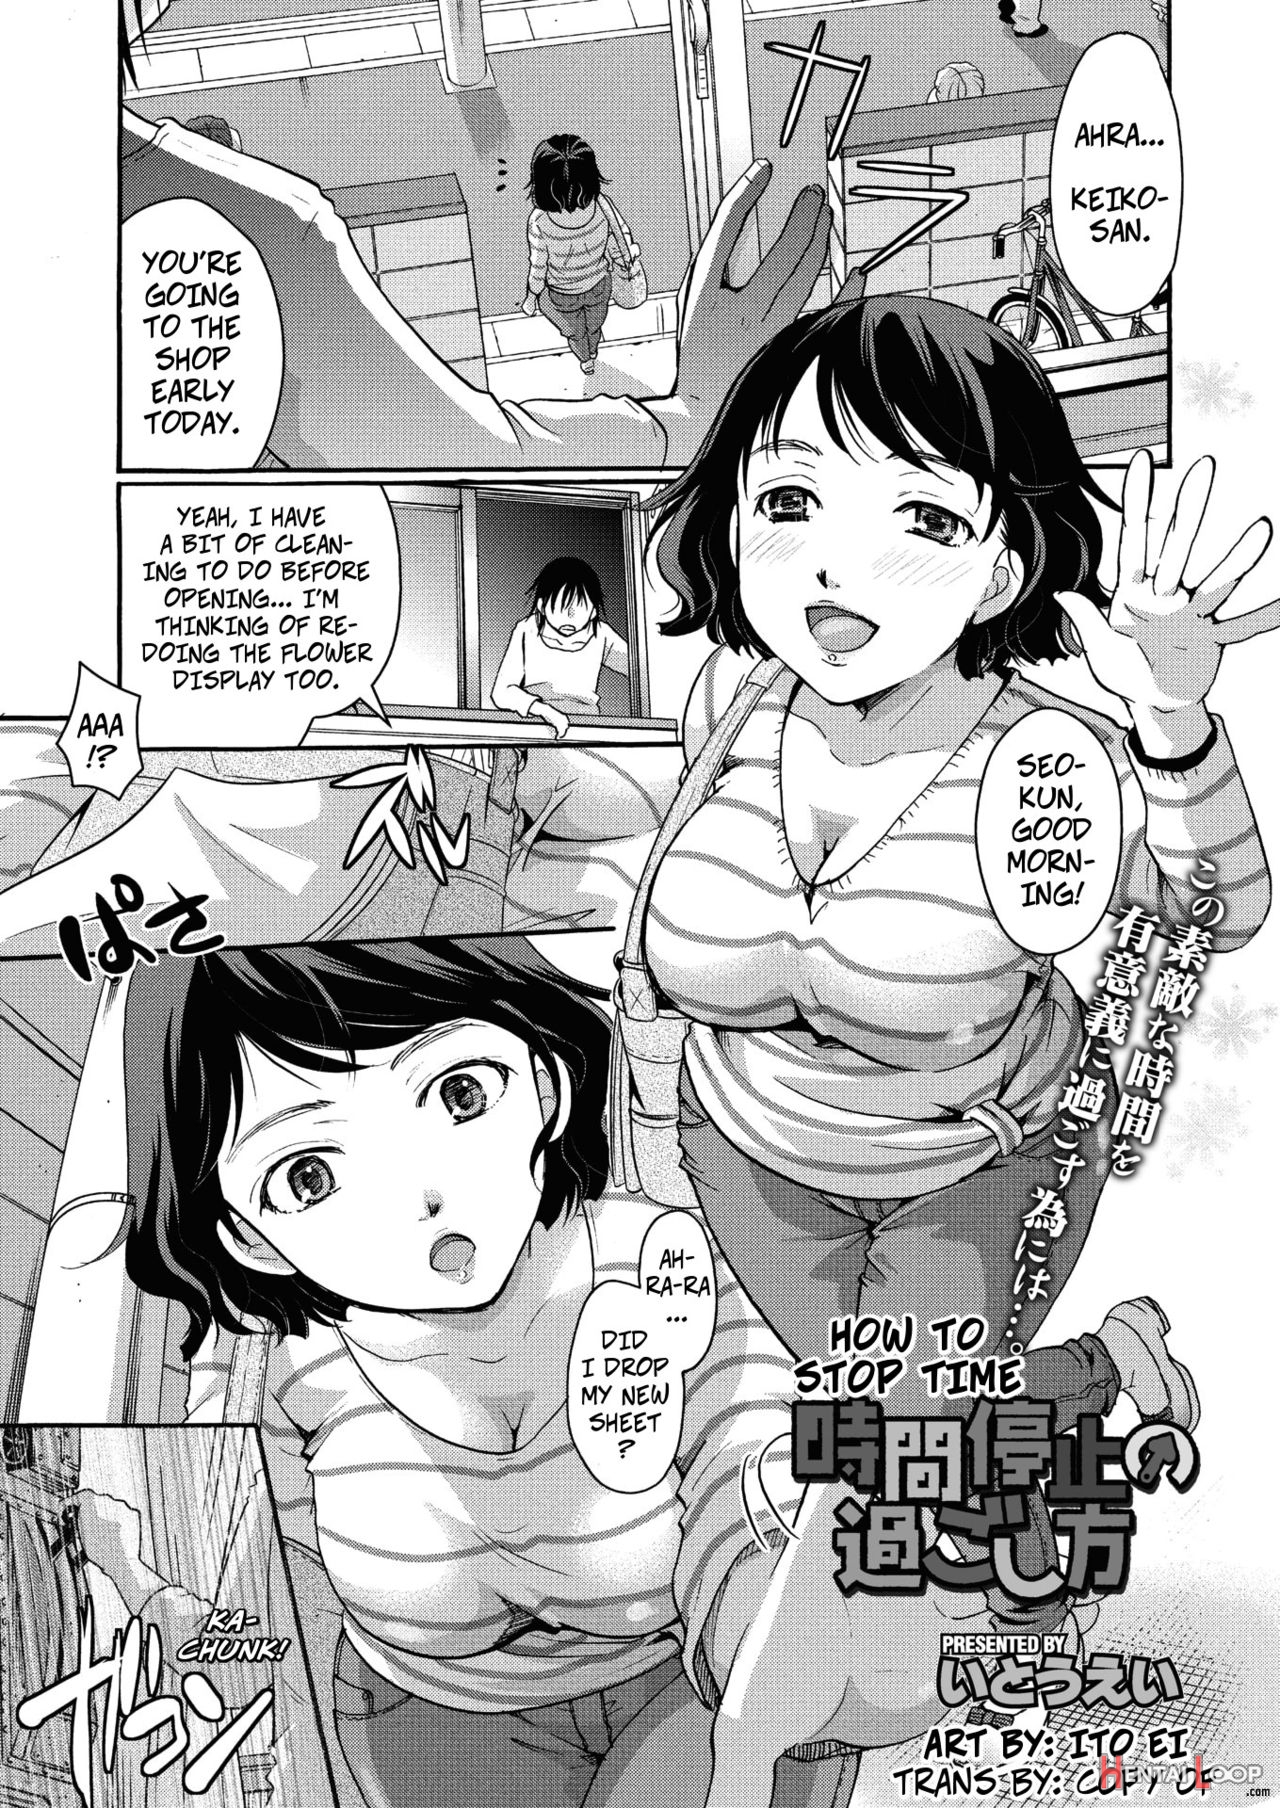 How To Stop Time (by Itou Ei) - Hentai doujinshi for free at HentaiLoop